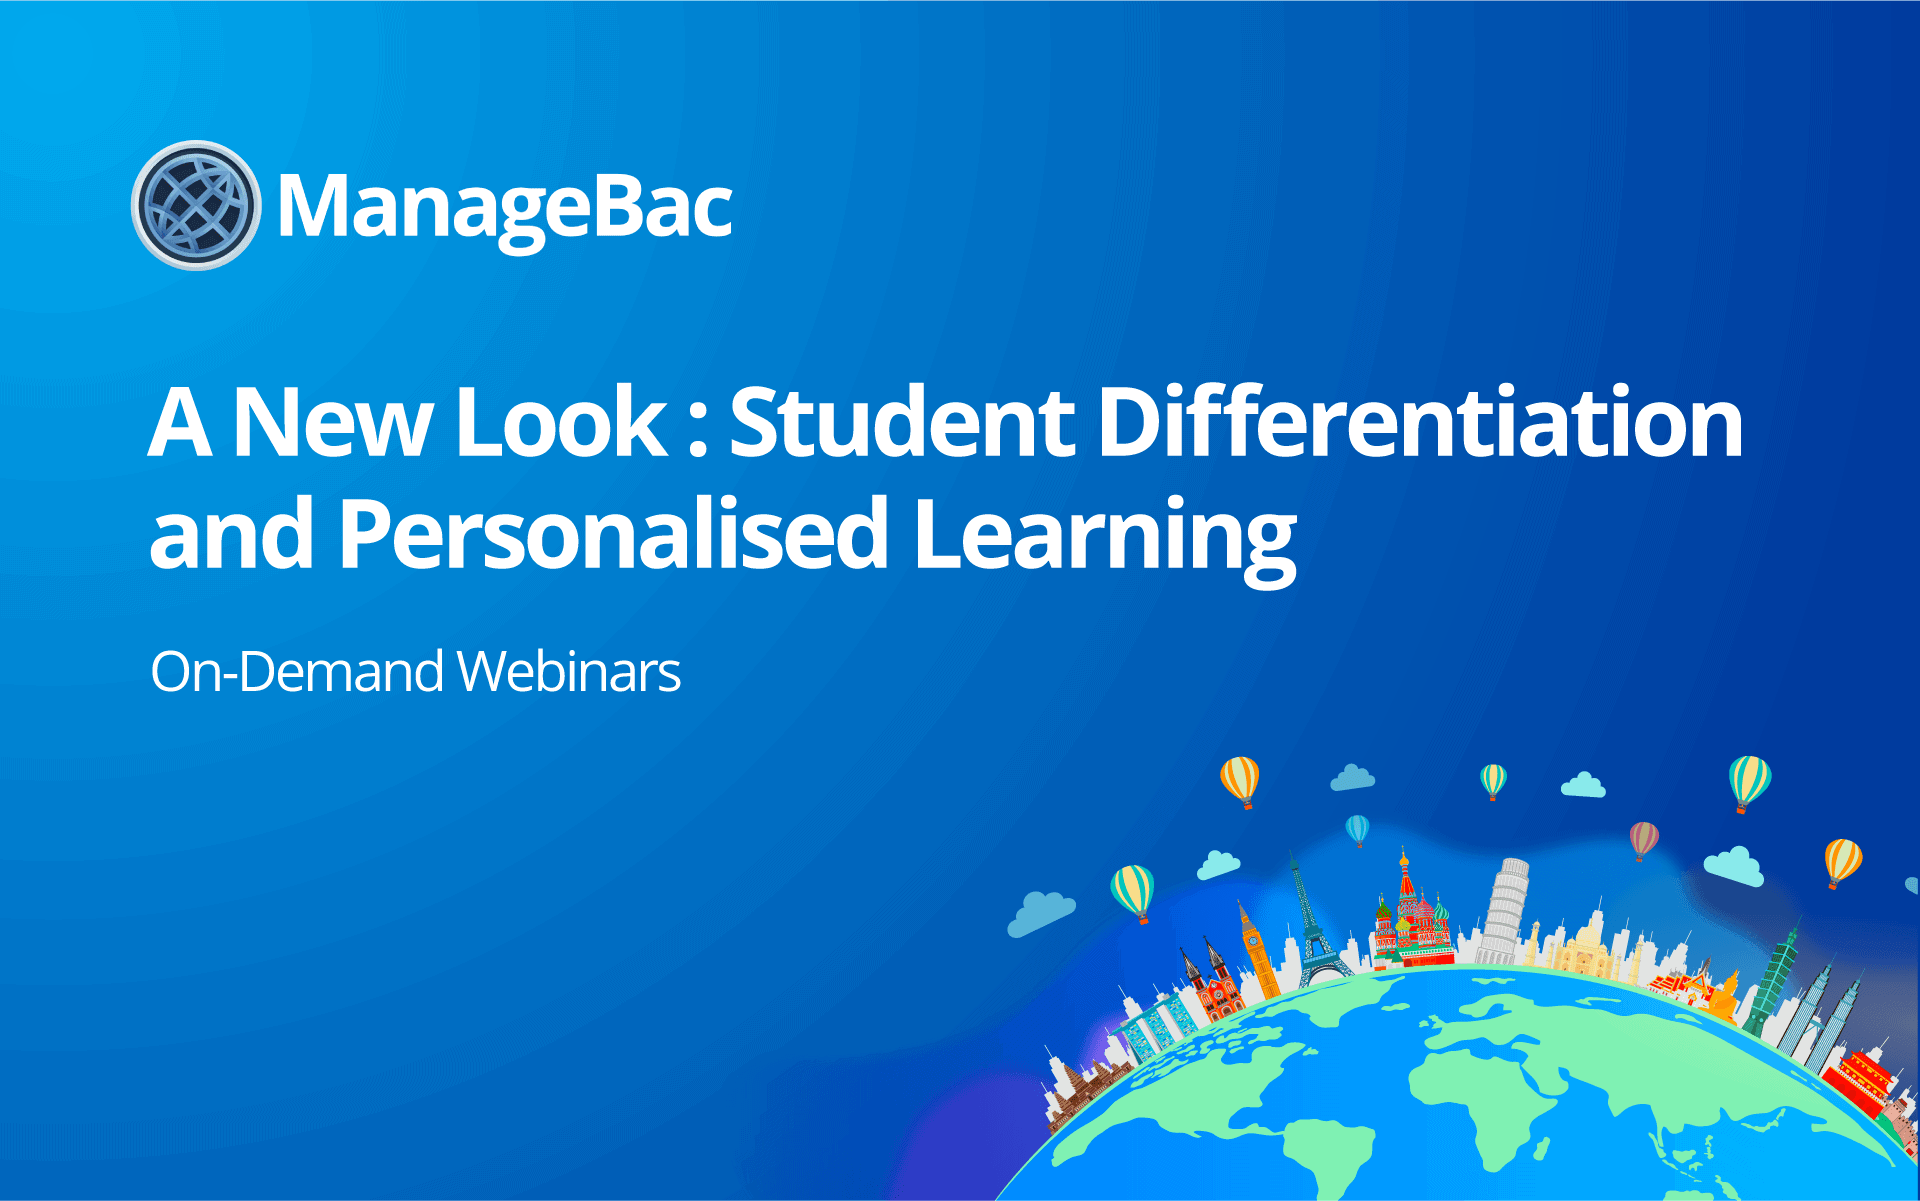 A New Look: Student Differentiation and Personalised Learning